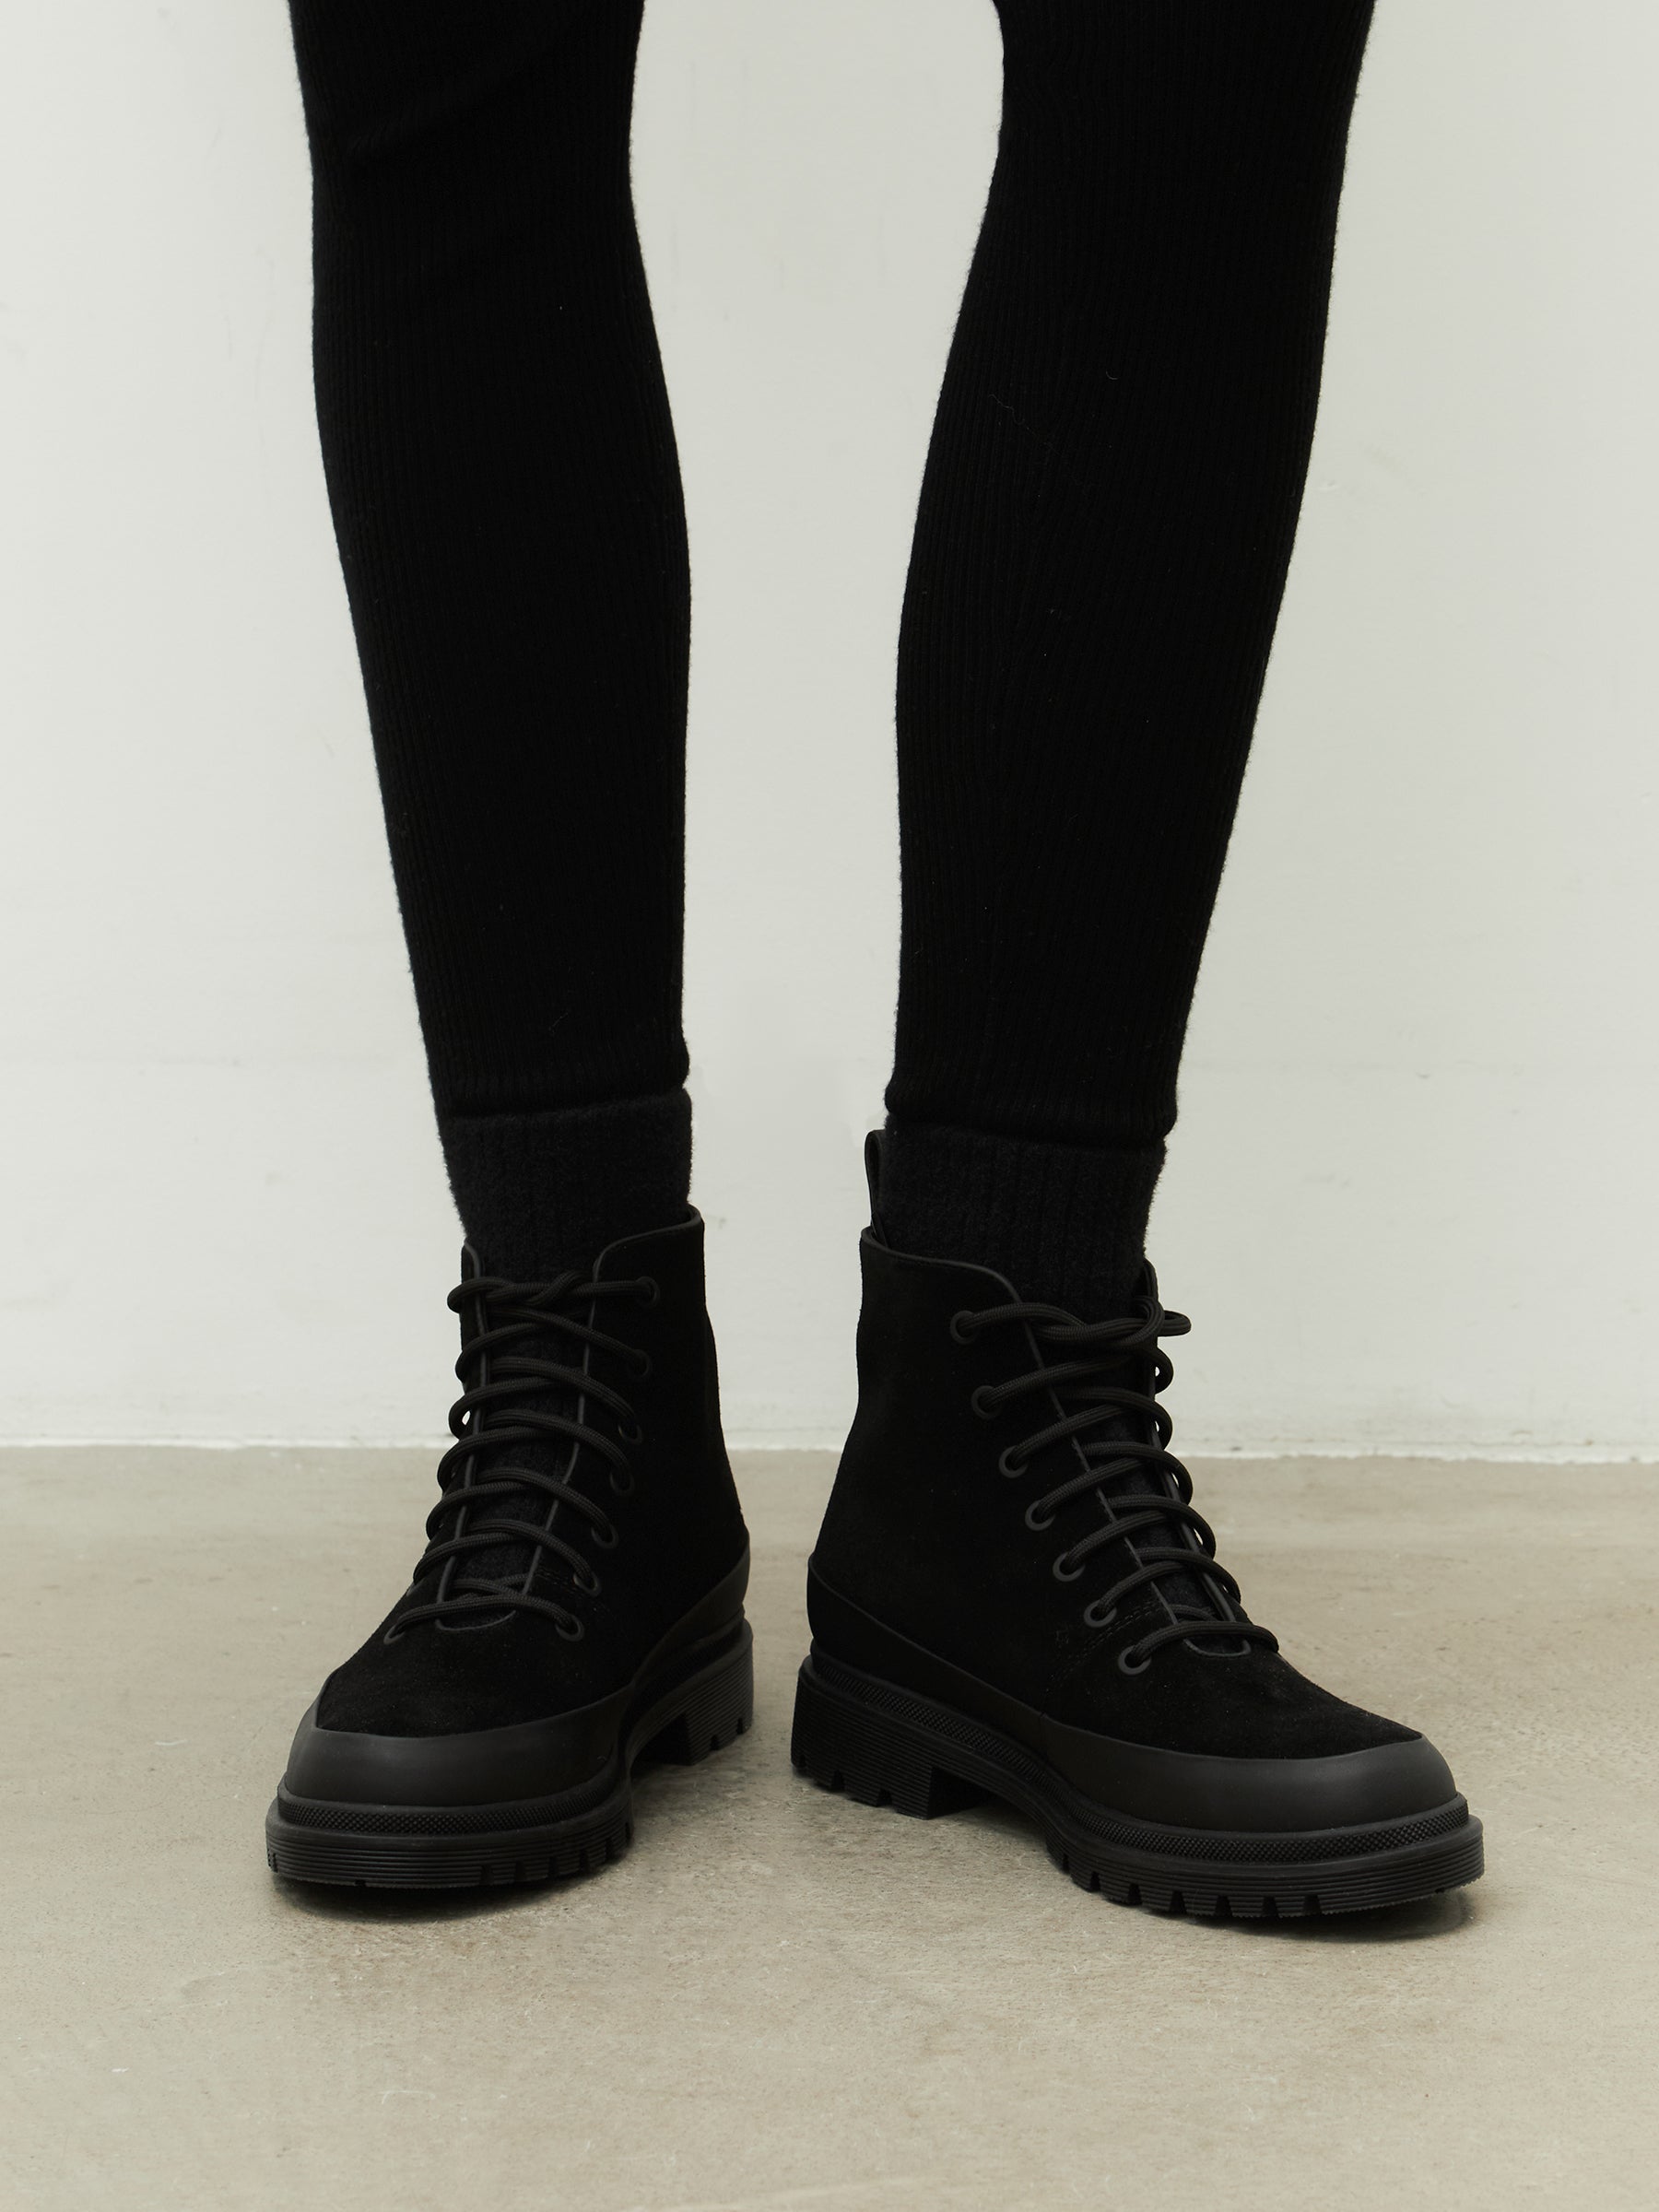 Suede lace-up boots